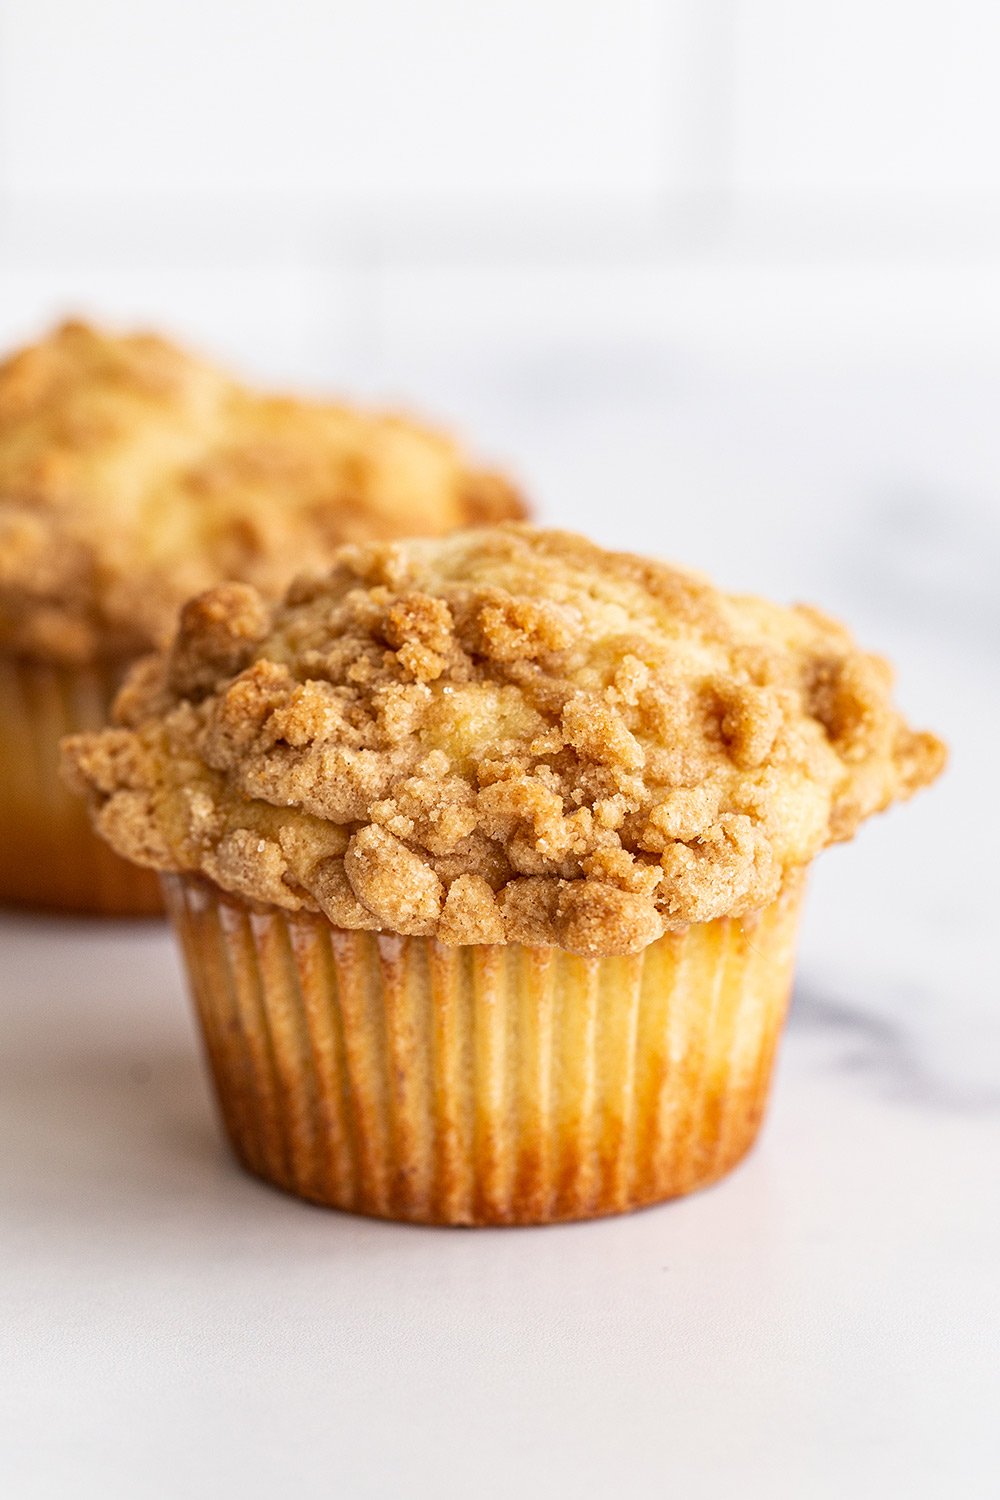 moist muffins with a cinnamon crumb topping